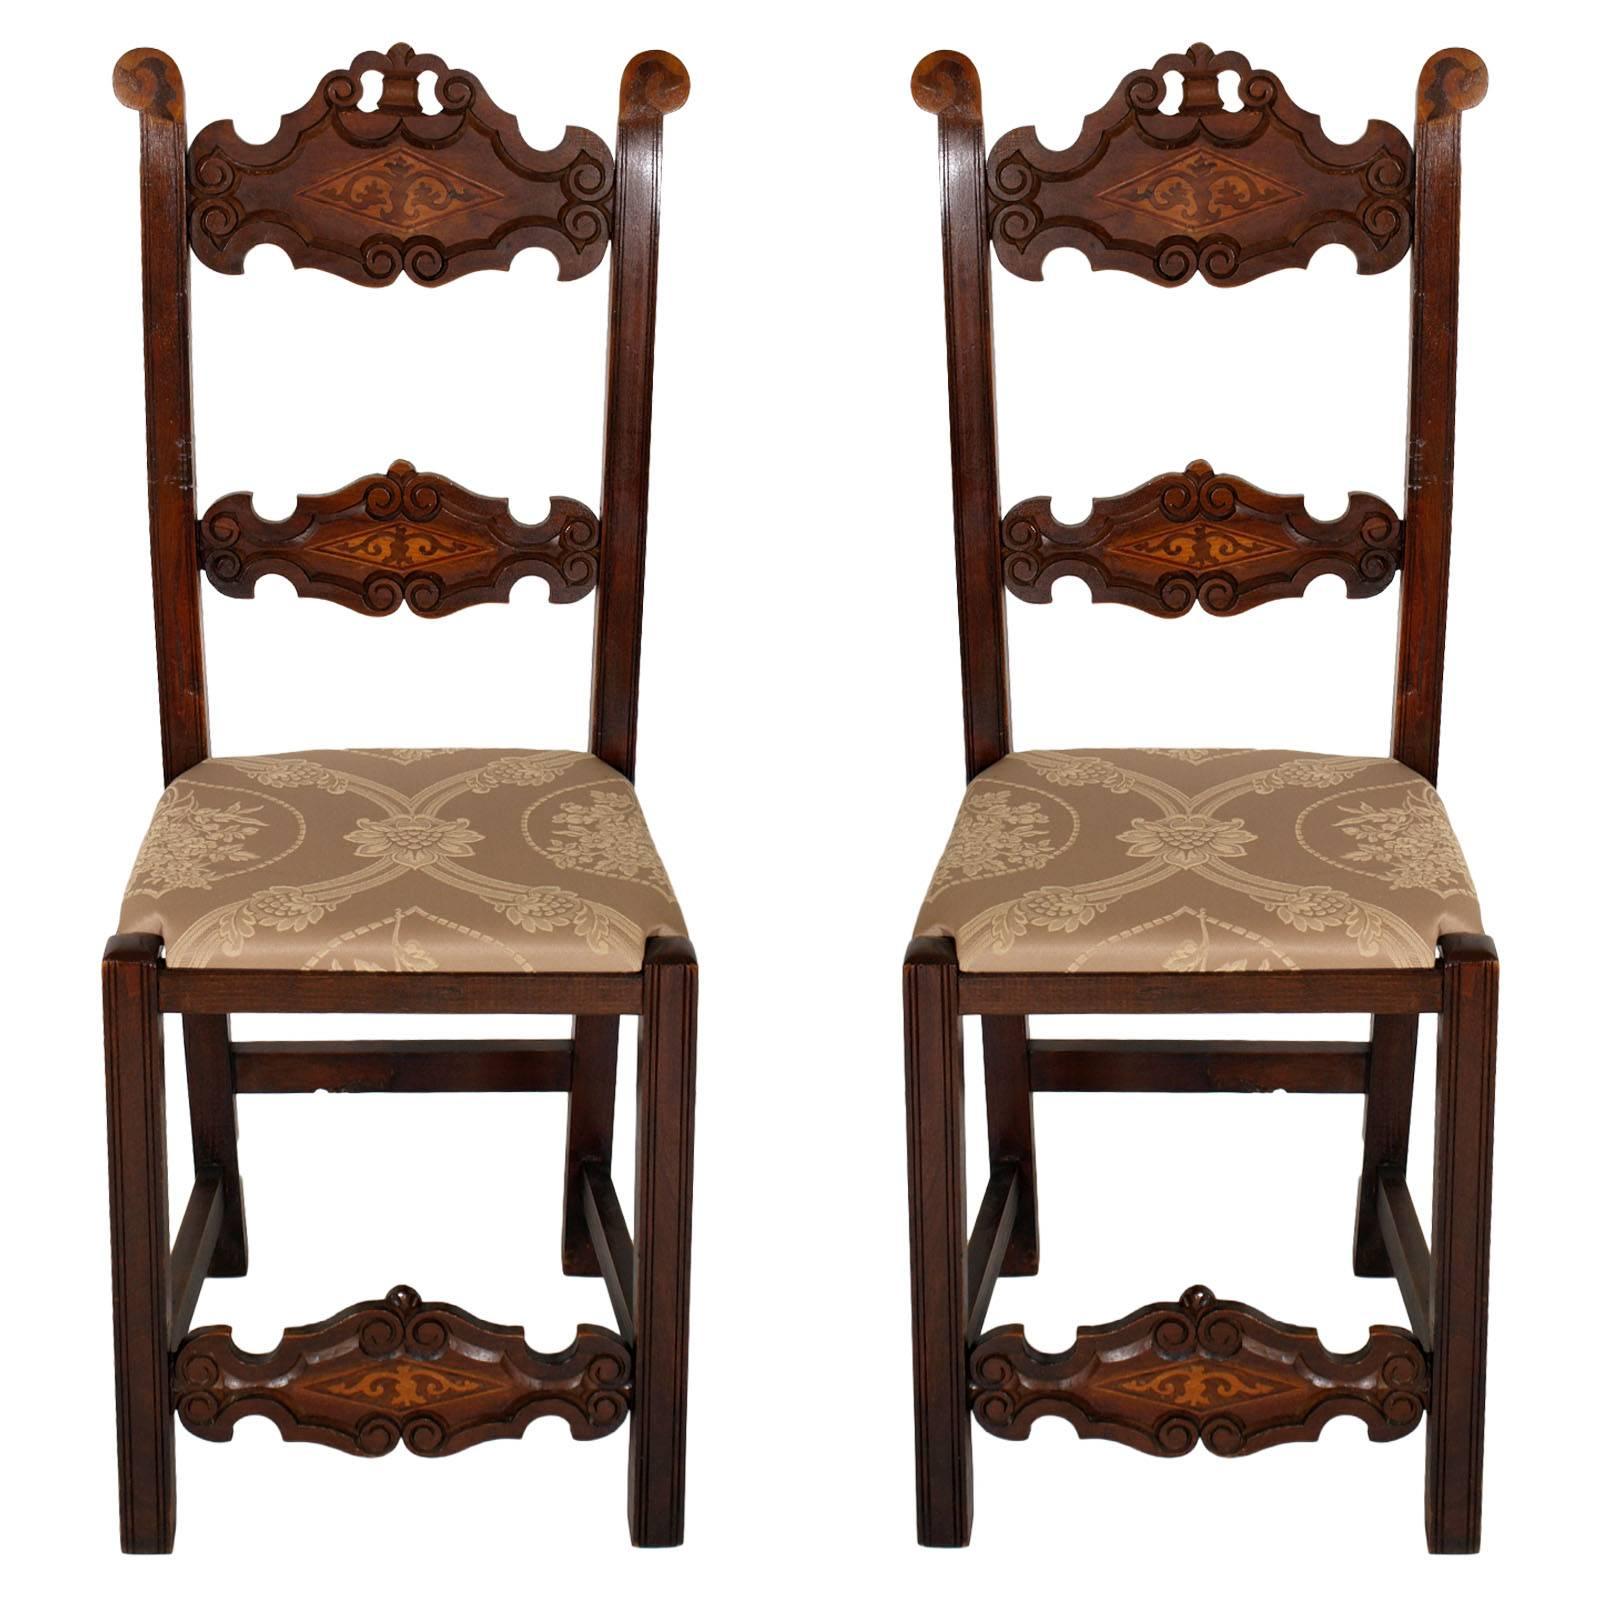 19th Century Pair Venetian Gothic Chairs in Walnut with finely carved decoration